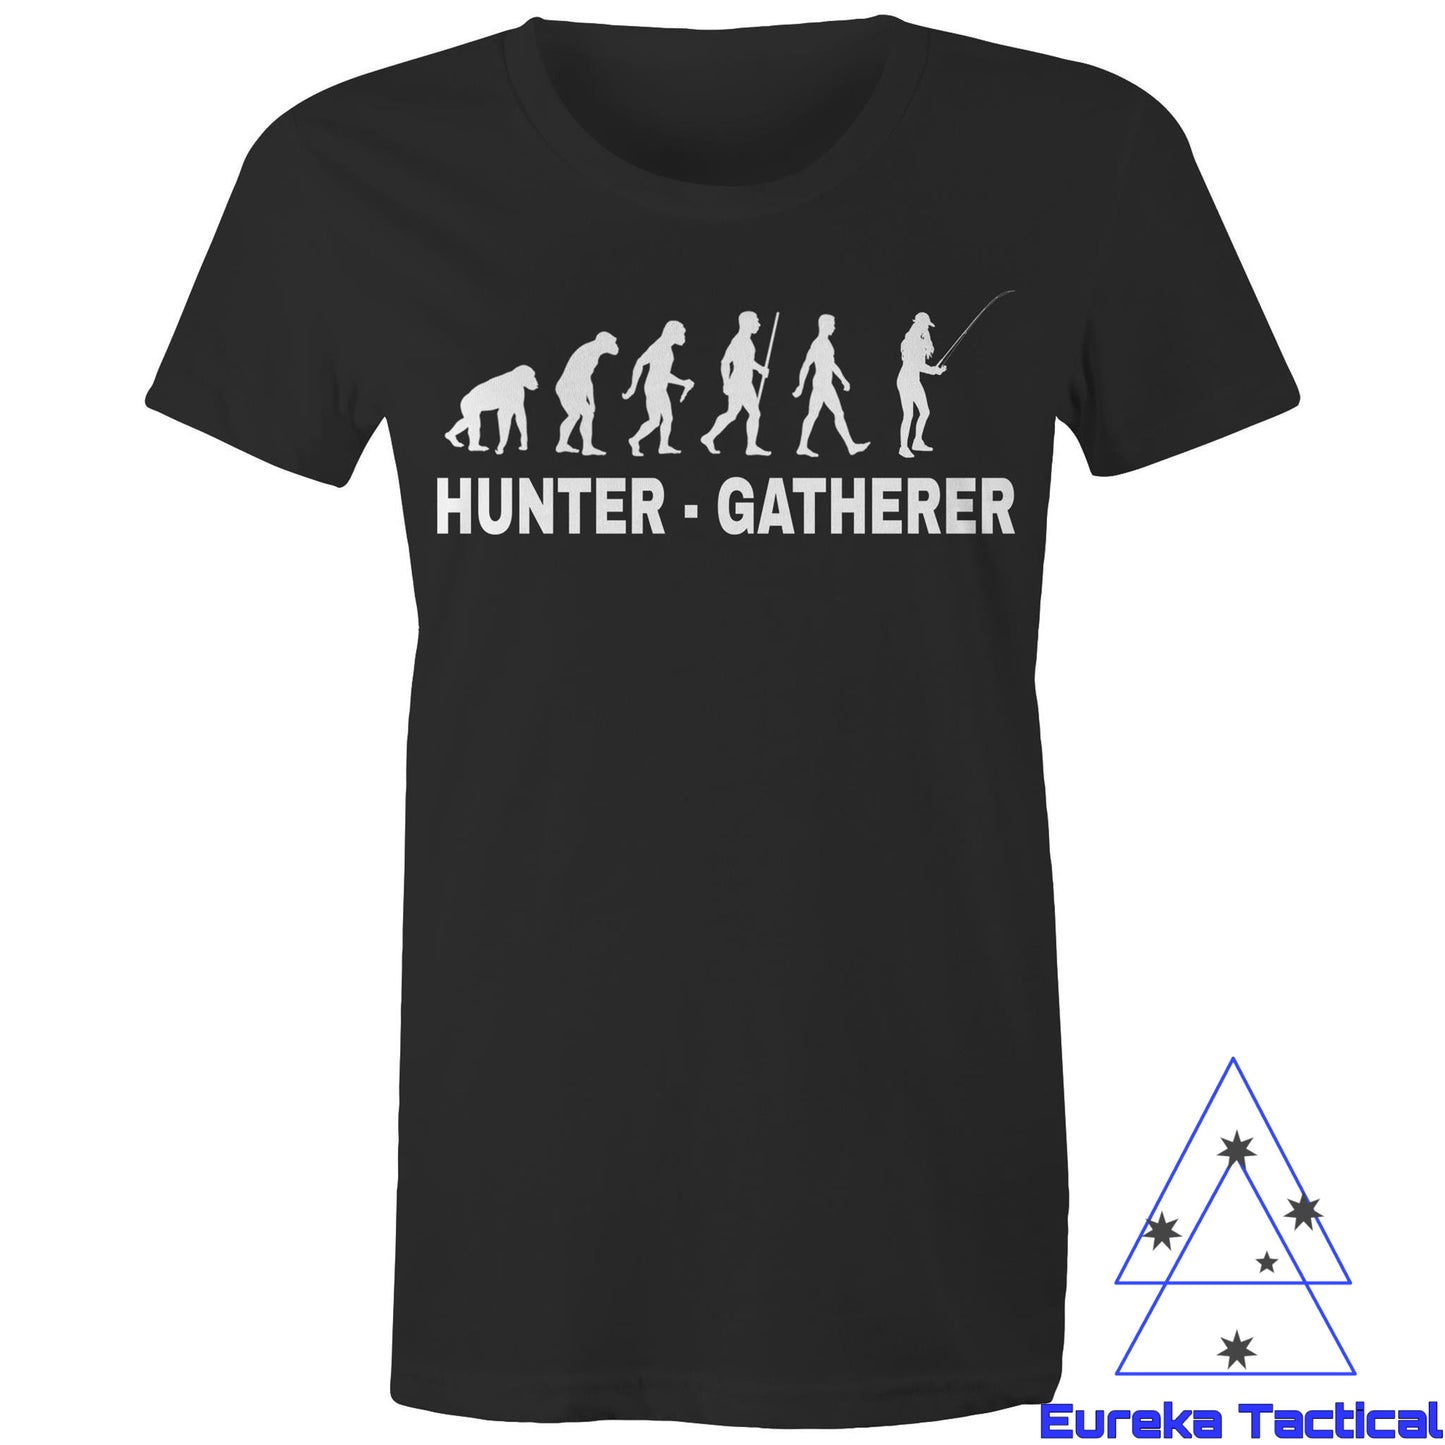 Hunter Gatherer - Fishing. AS Color 100% cotton womens maple tee.